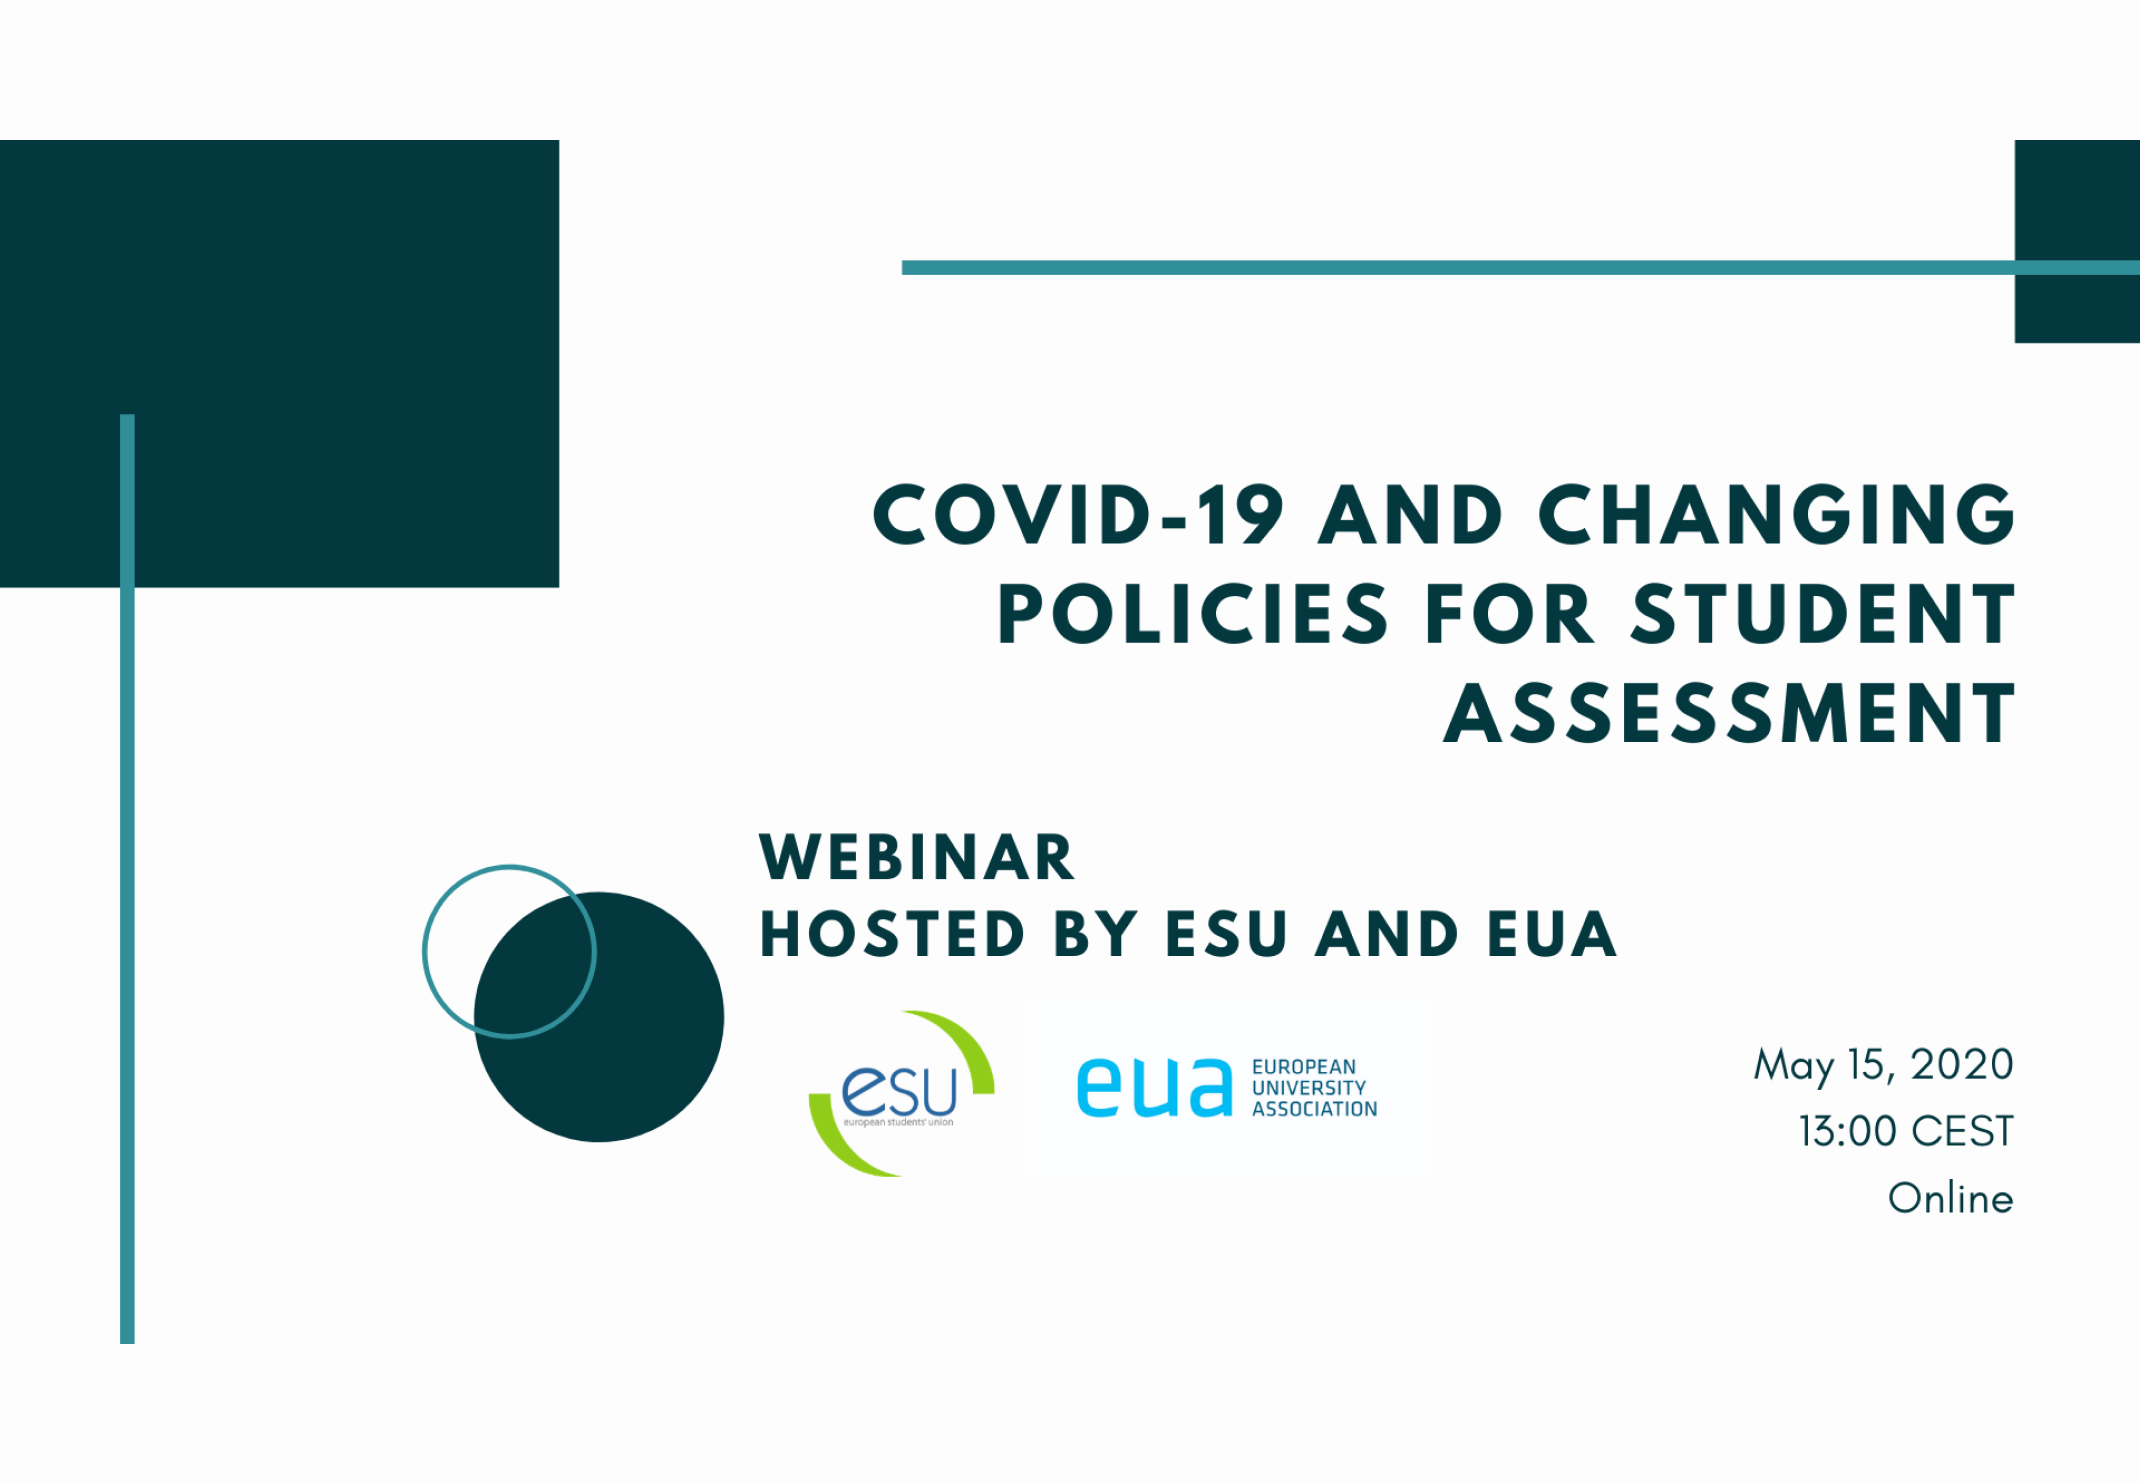 Webinar: COVID-19 and changing policies for student assessment